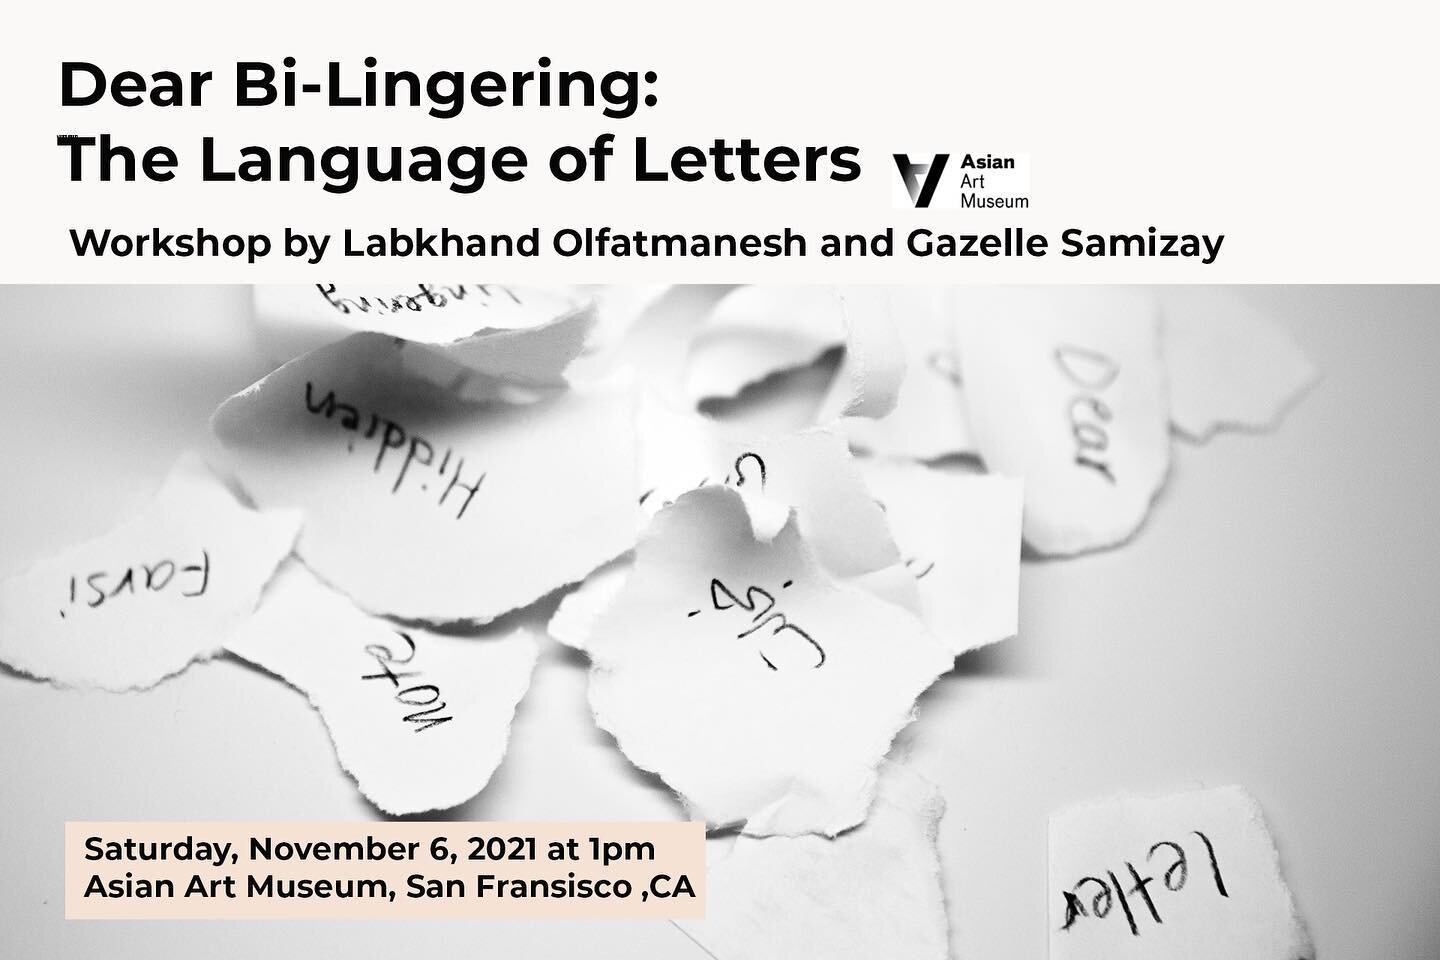 Mark your calendar and meet us for Saturday November 6, at 1pm for Dear Bi-Lingering: The Language of Letters workshop as part of After Hope symposium: Future Forms and Alternative Methods,@asianartmuseum in San Francisco ,Ca

Are you Bi-Lingering&md